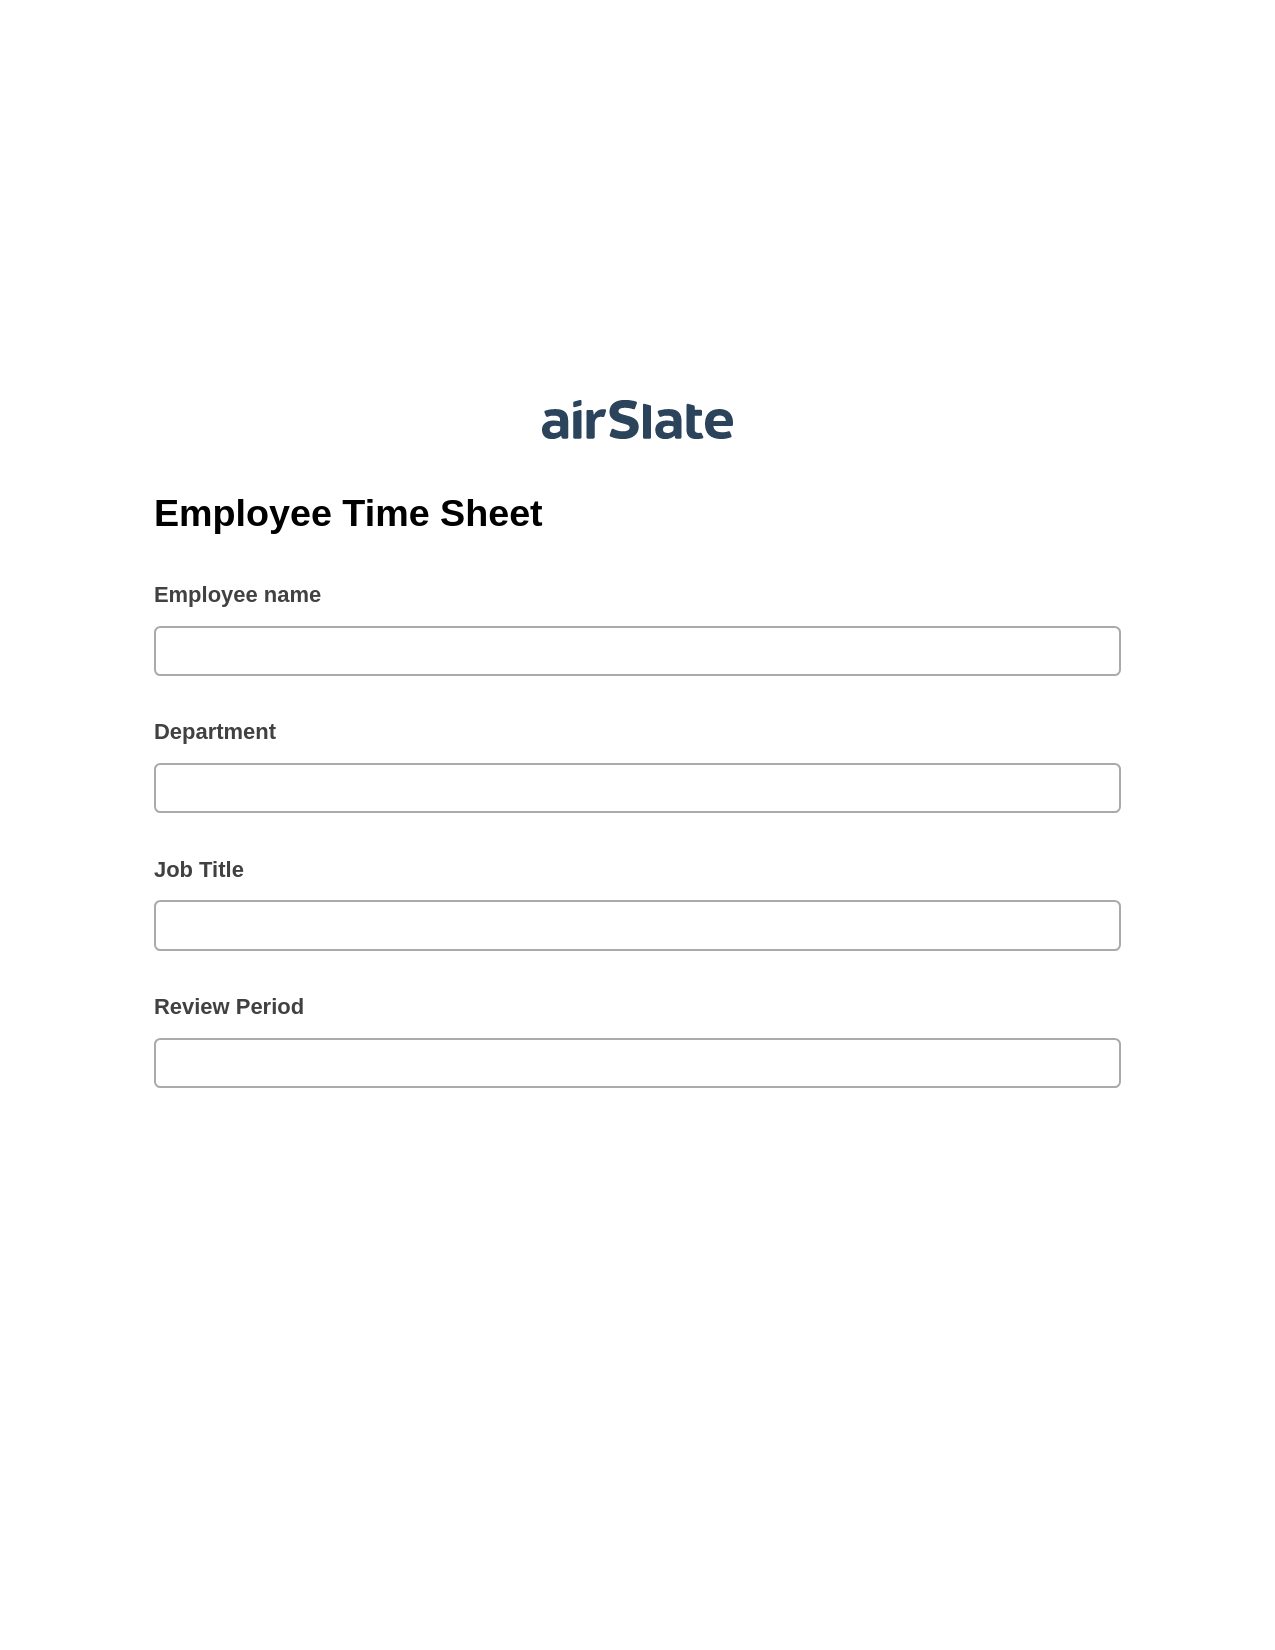 Employee Time Sheet Prefill from NetSuite records, Open under a Role Bot, Archive to Box Bot